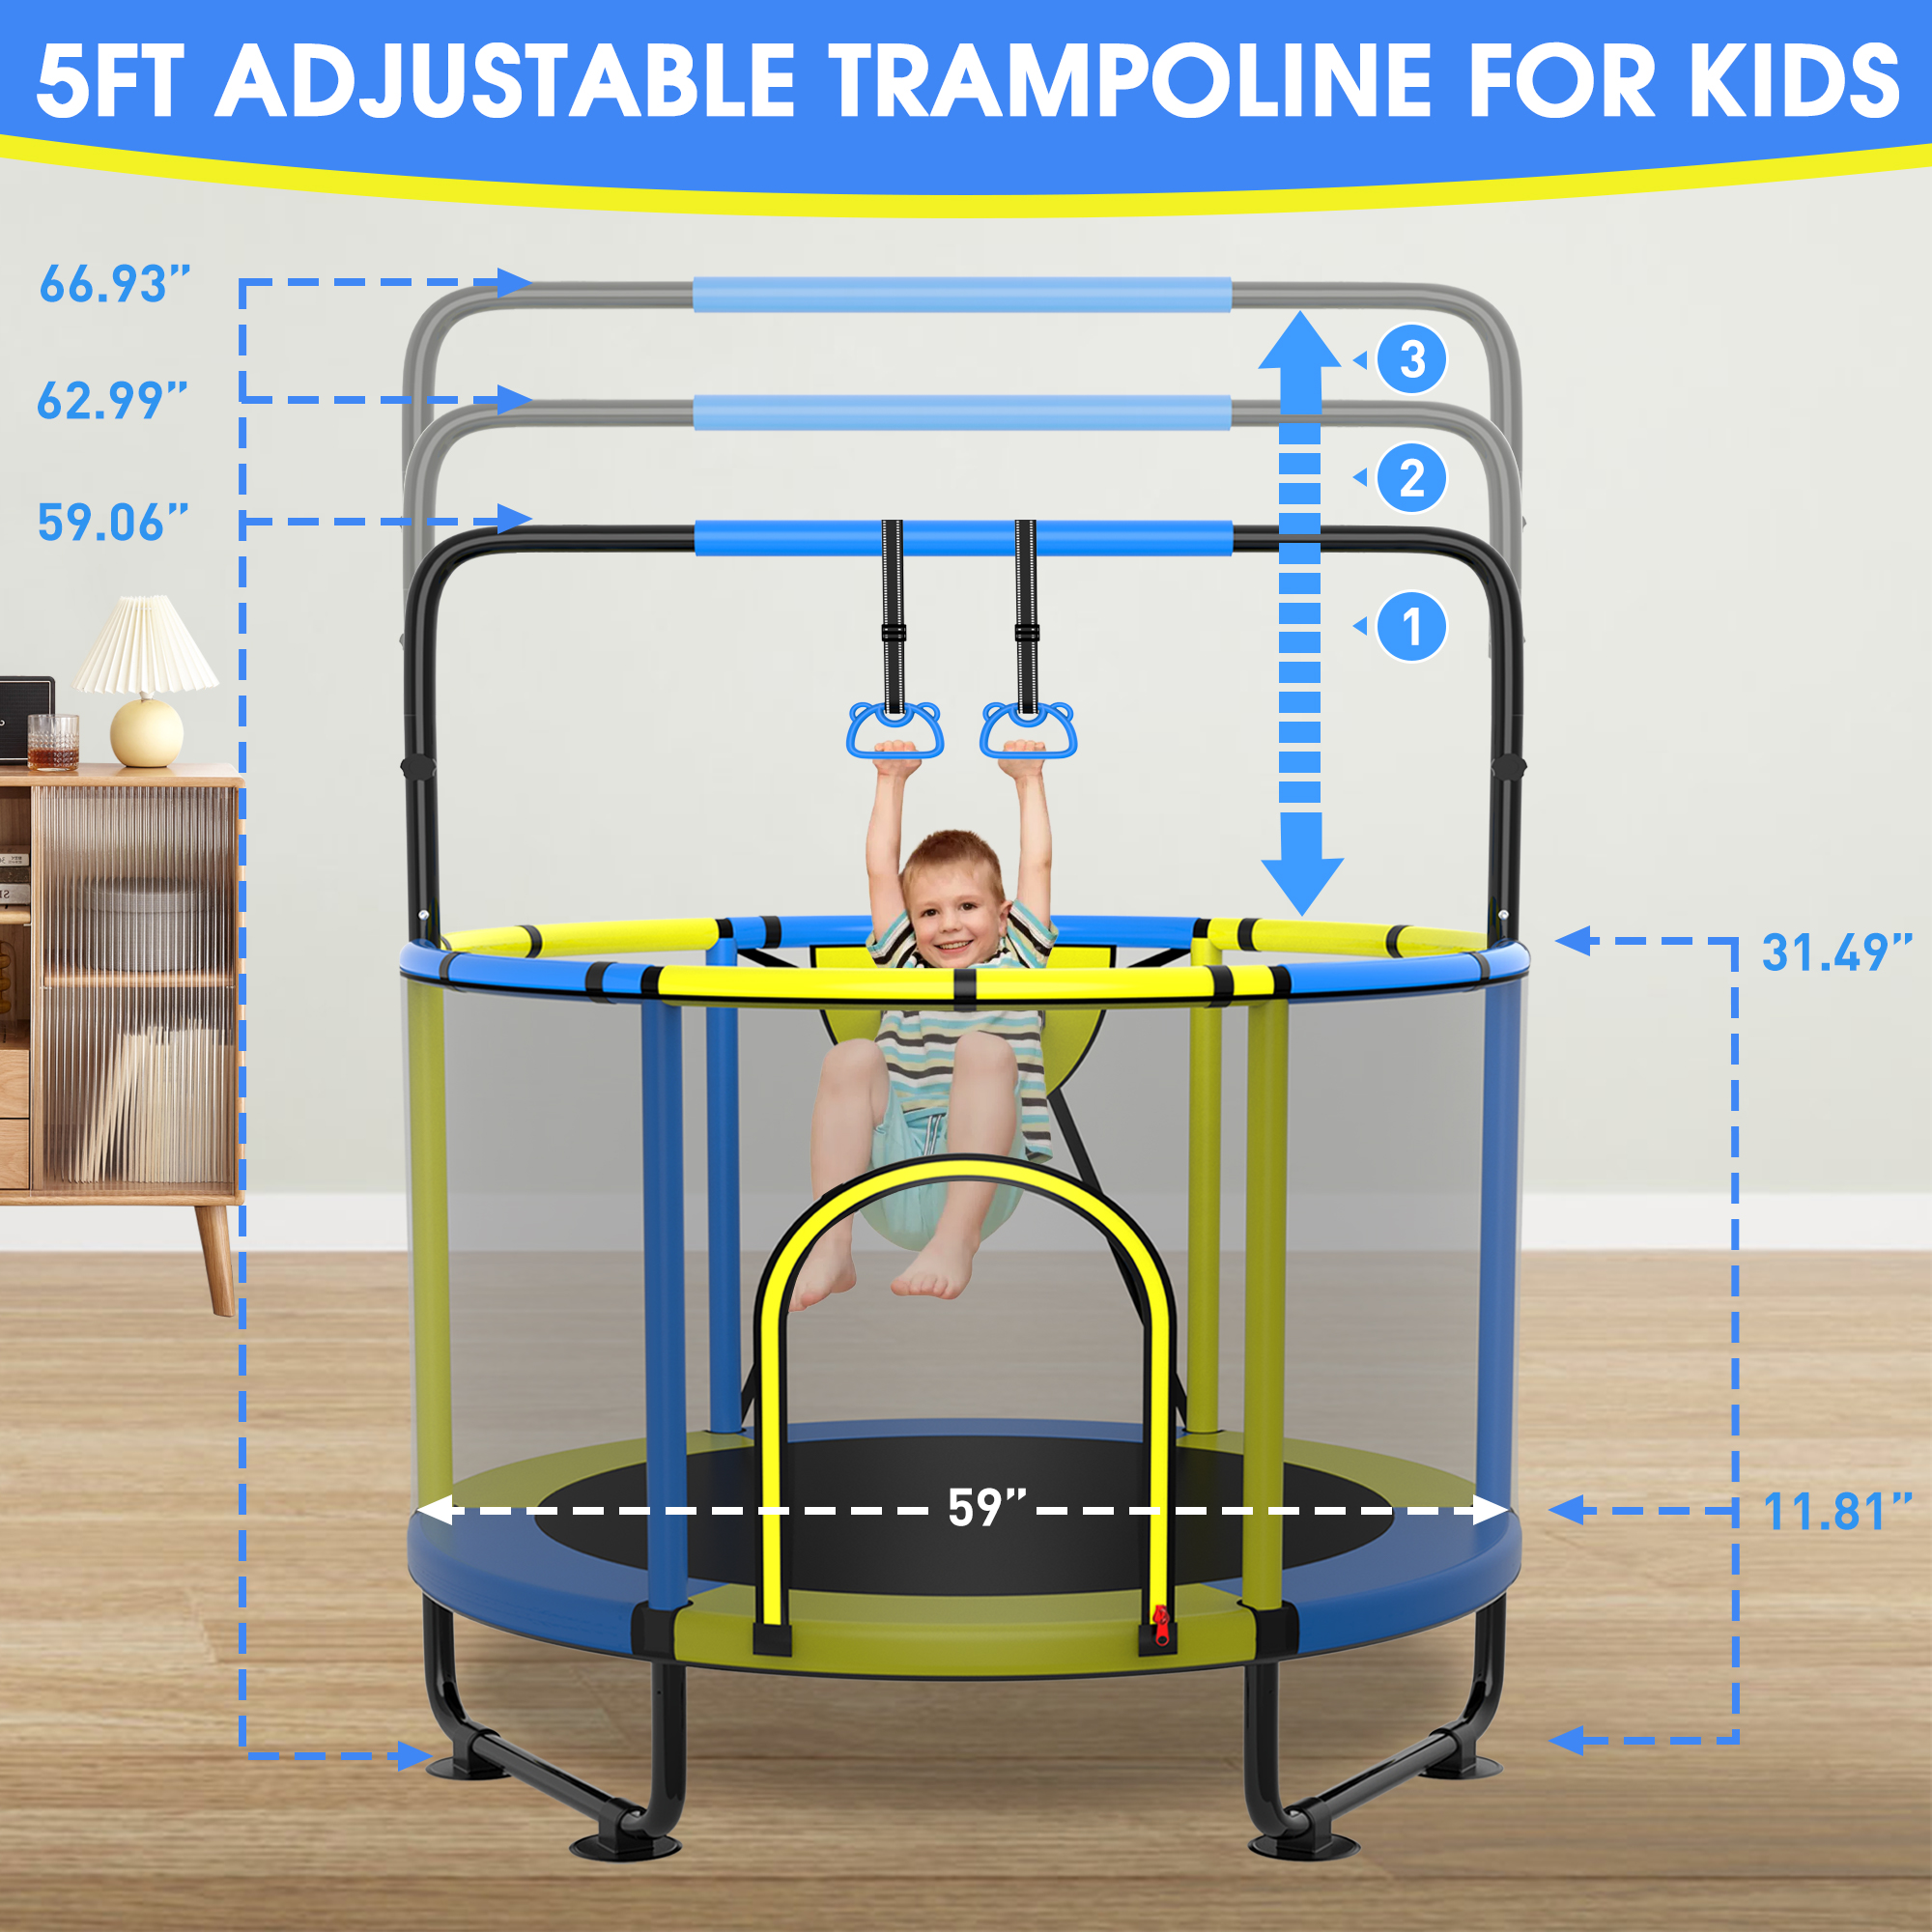 Kumix 60'' Trampoline for Kids, 440LBS Indoor/Outdoor Trampoline with Enclosure, Basketball Hoop, Mini Toddler Trampoline with Swings, Adjustable Bars and Rings, Gifts for Kids, Toddler, Boys & Girls - image 4 of 7